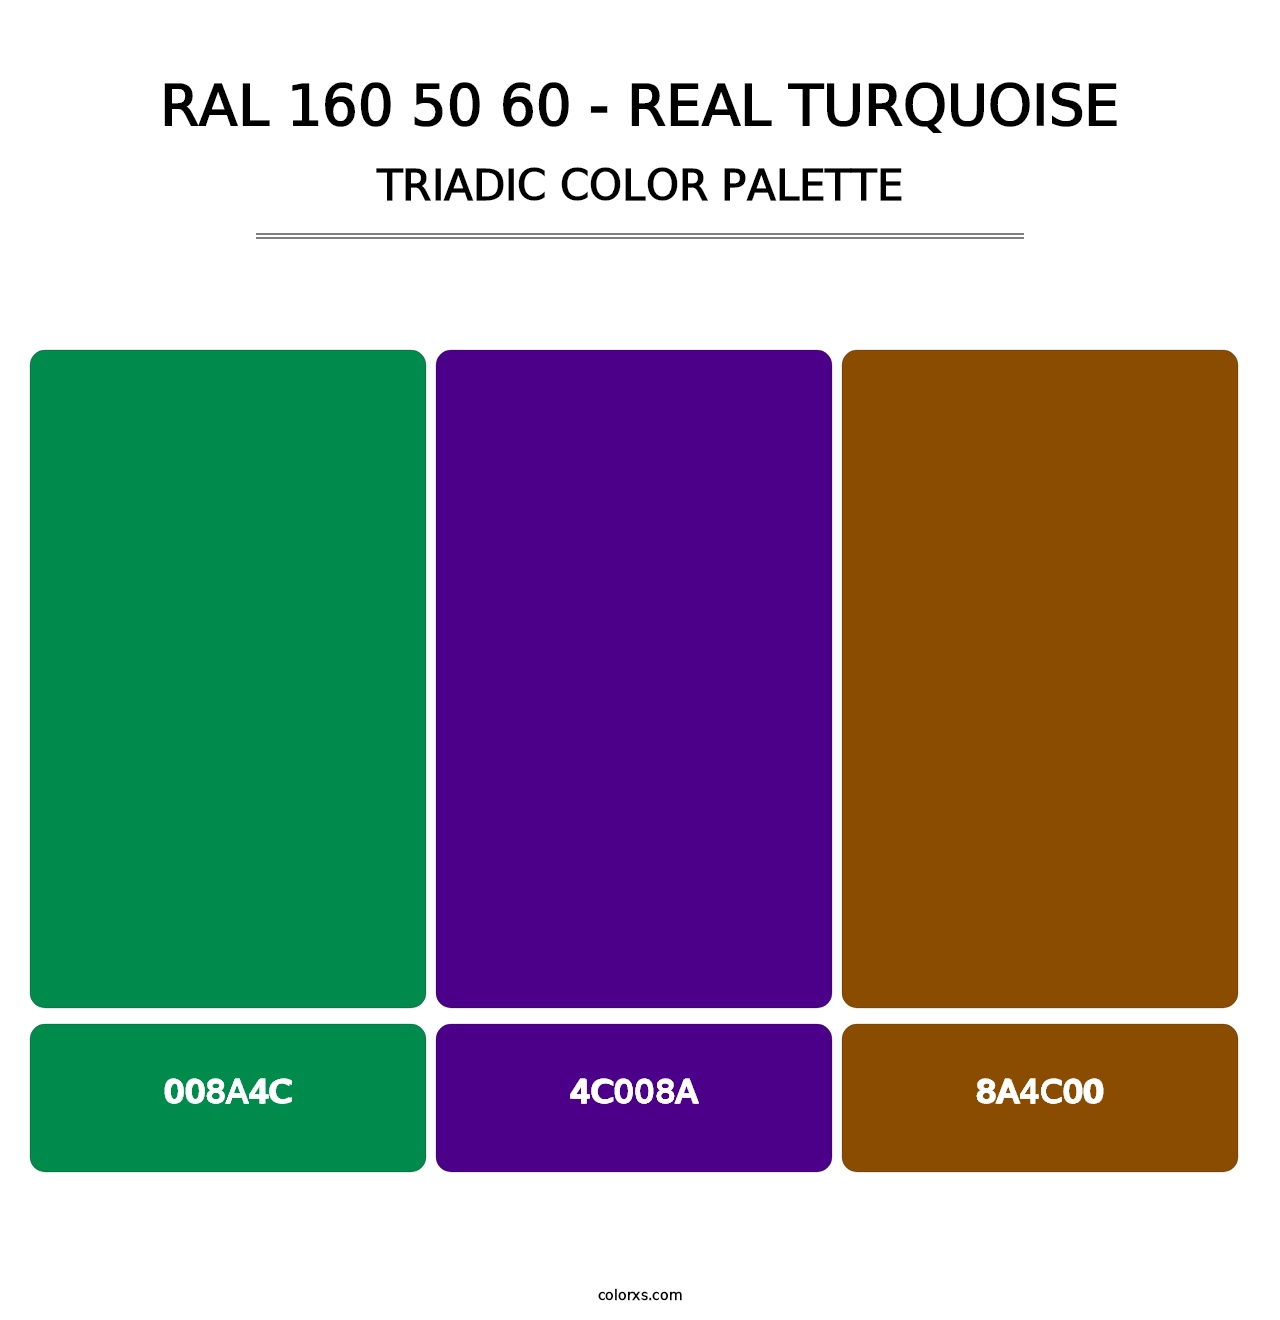 RAL 160 50 60 - Real Turquoise - Triadic Color Palette